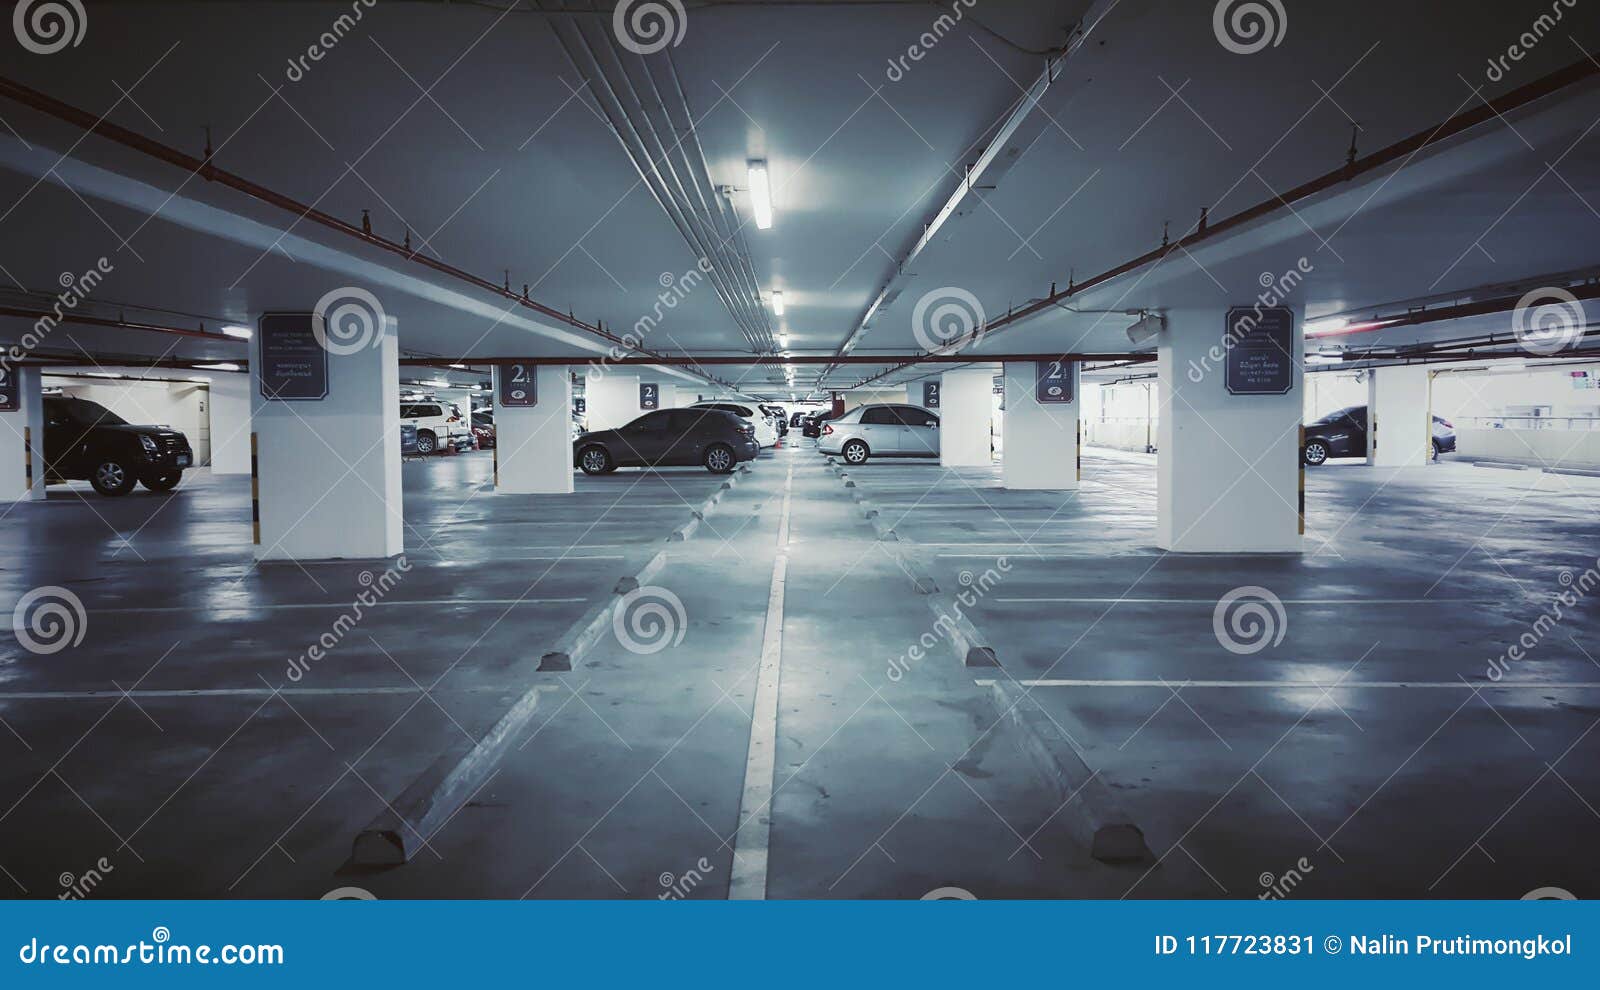 Car Parking Bar in the Area in Department Store Stock Image - Image of